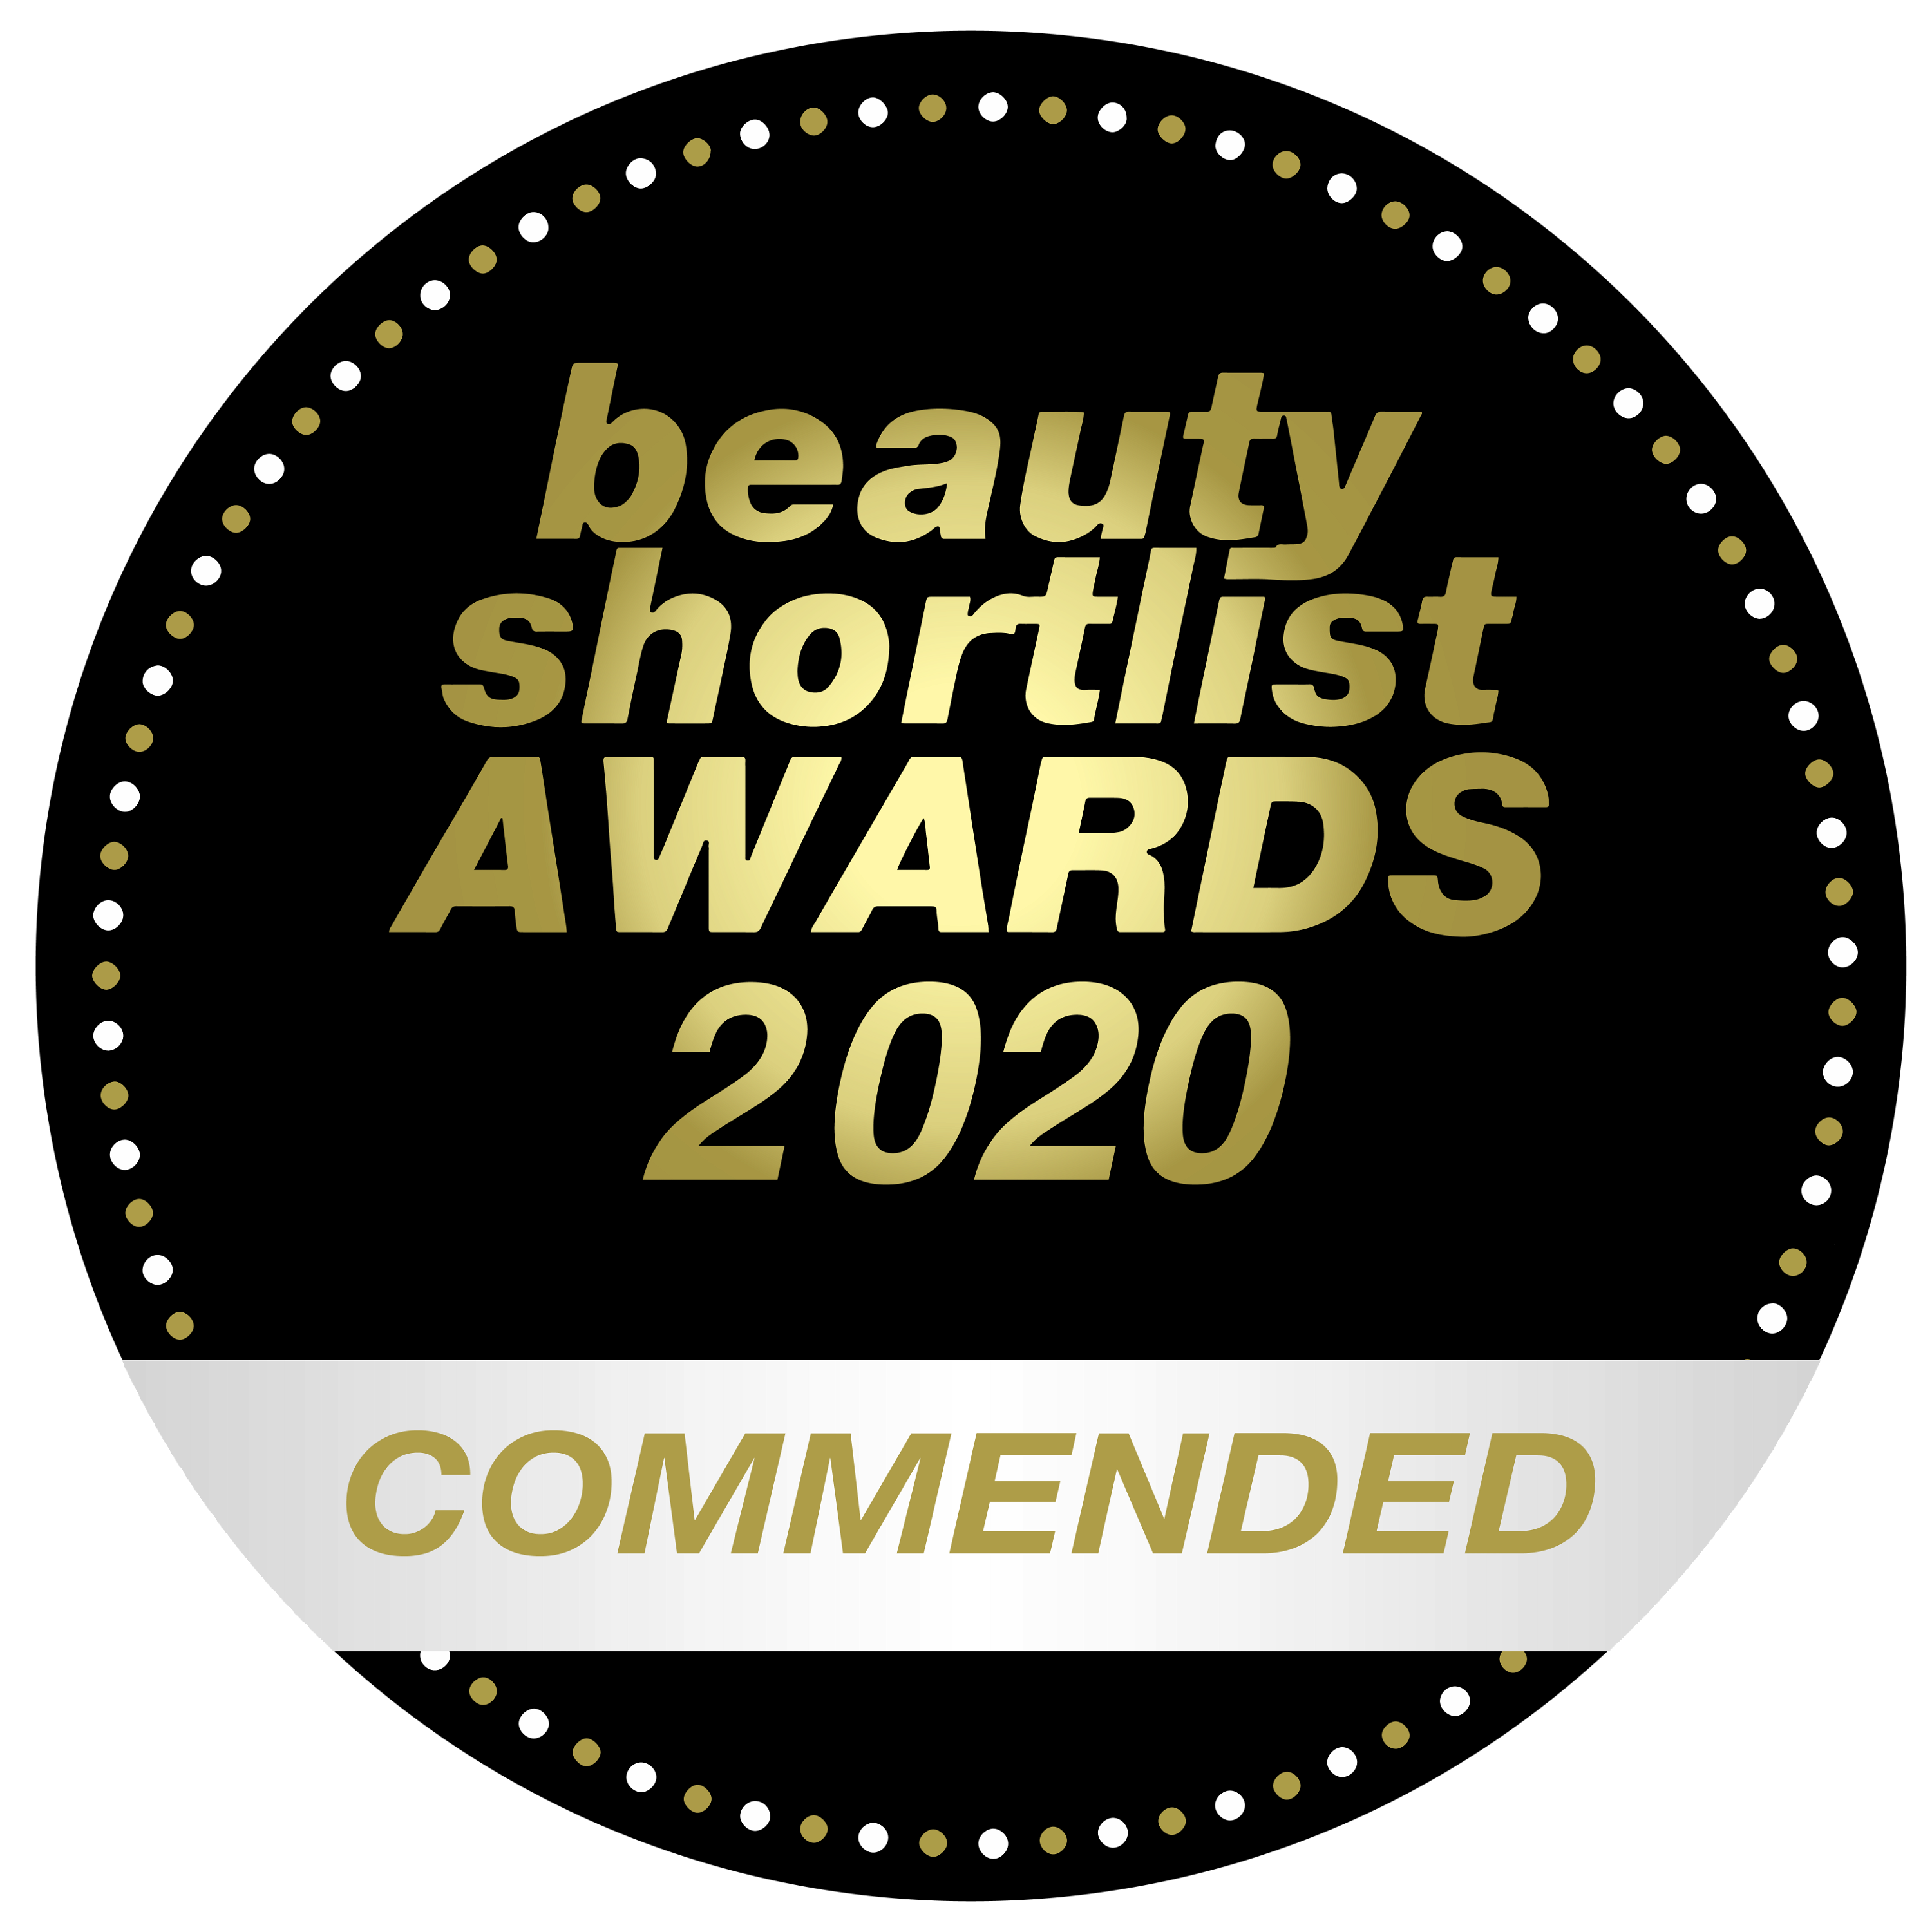 Beauty Awards 2020 - Commended